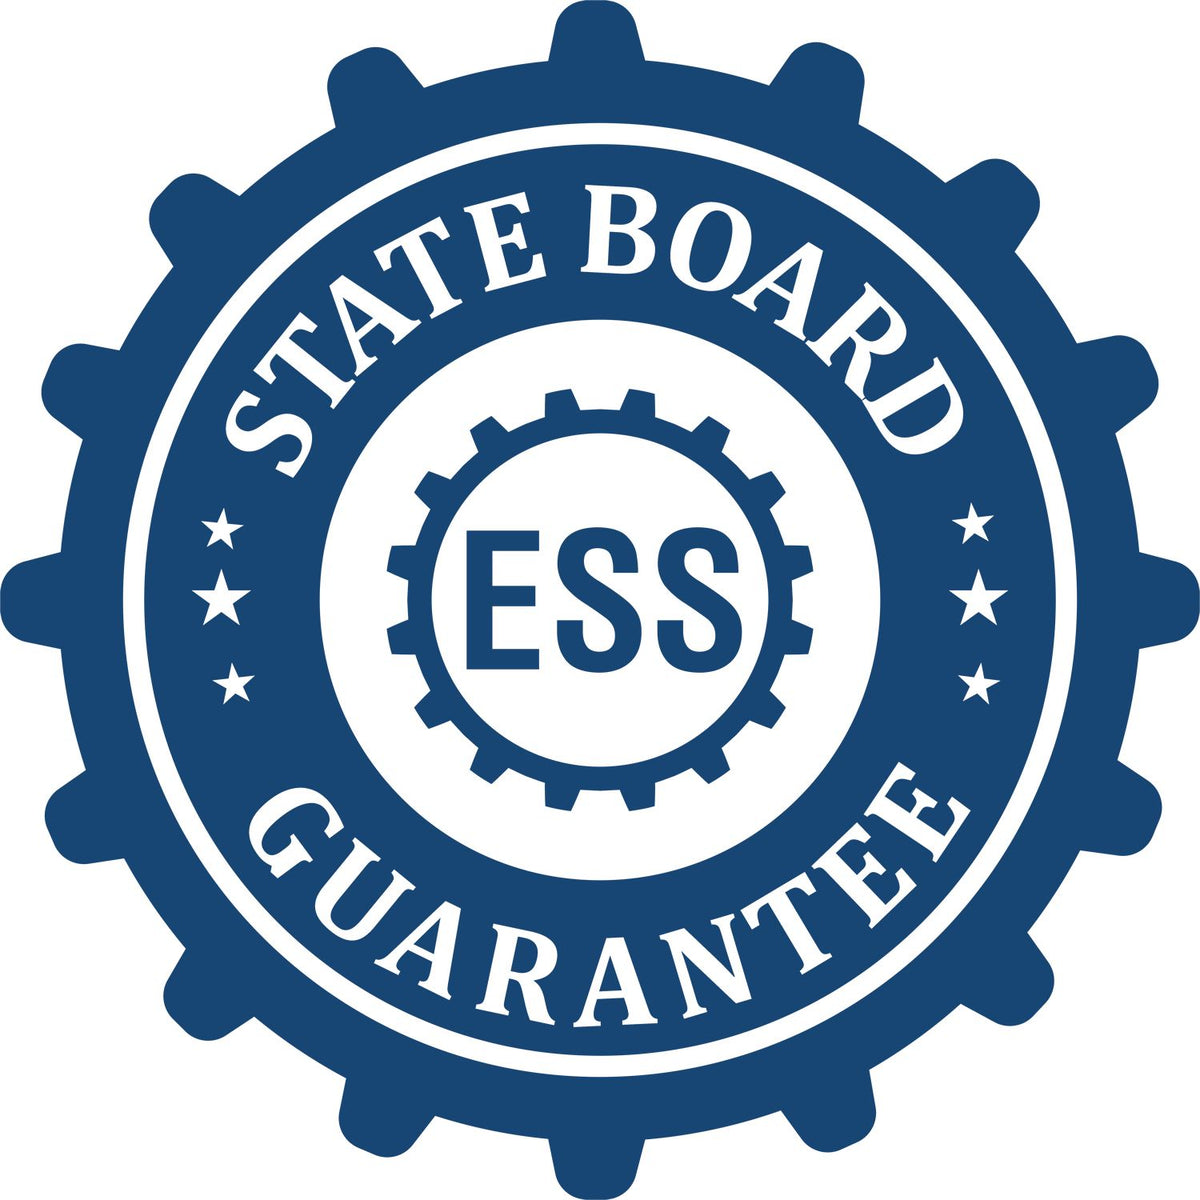 An emblem in a gear shape illustrating a state board guarantee for the Gift Nevada Architect Seal